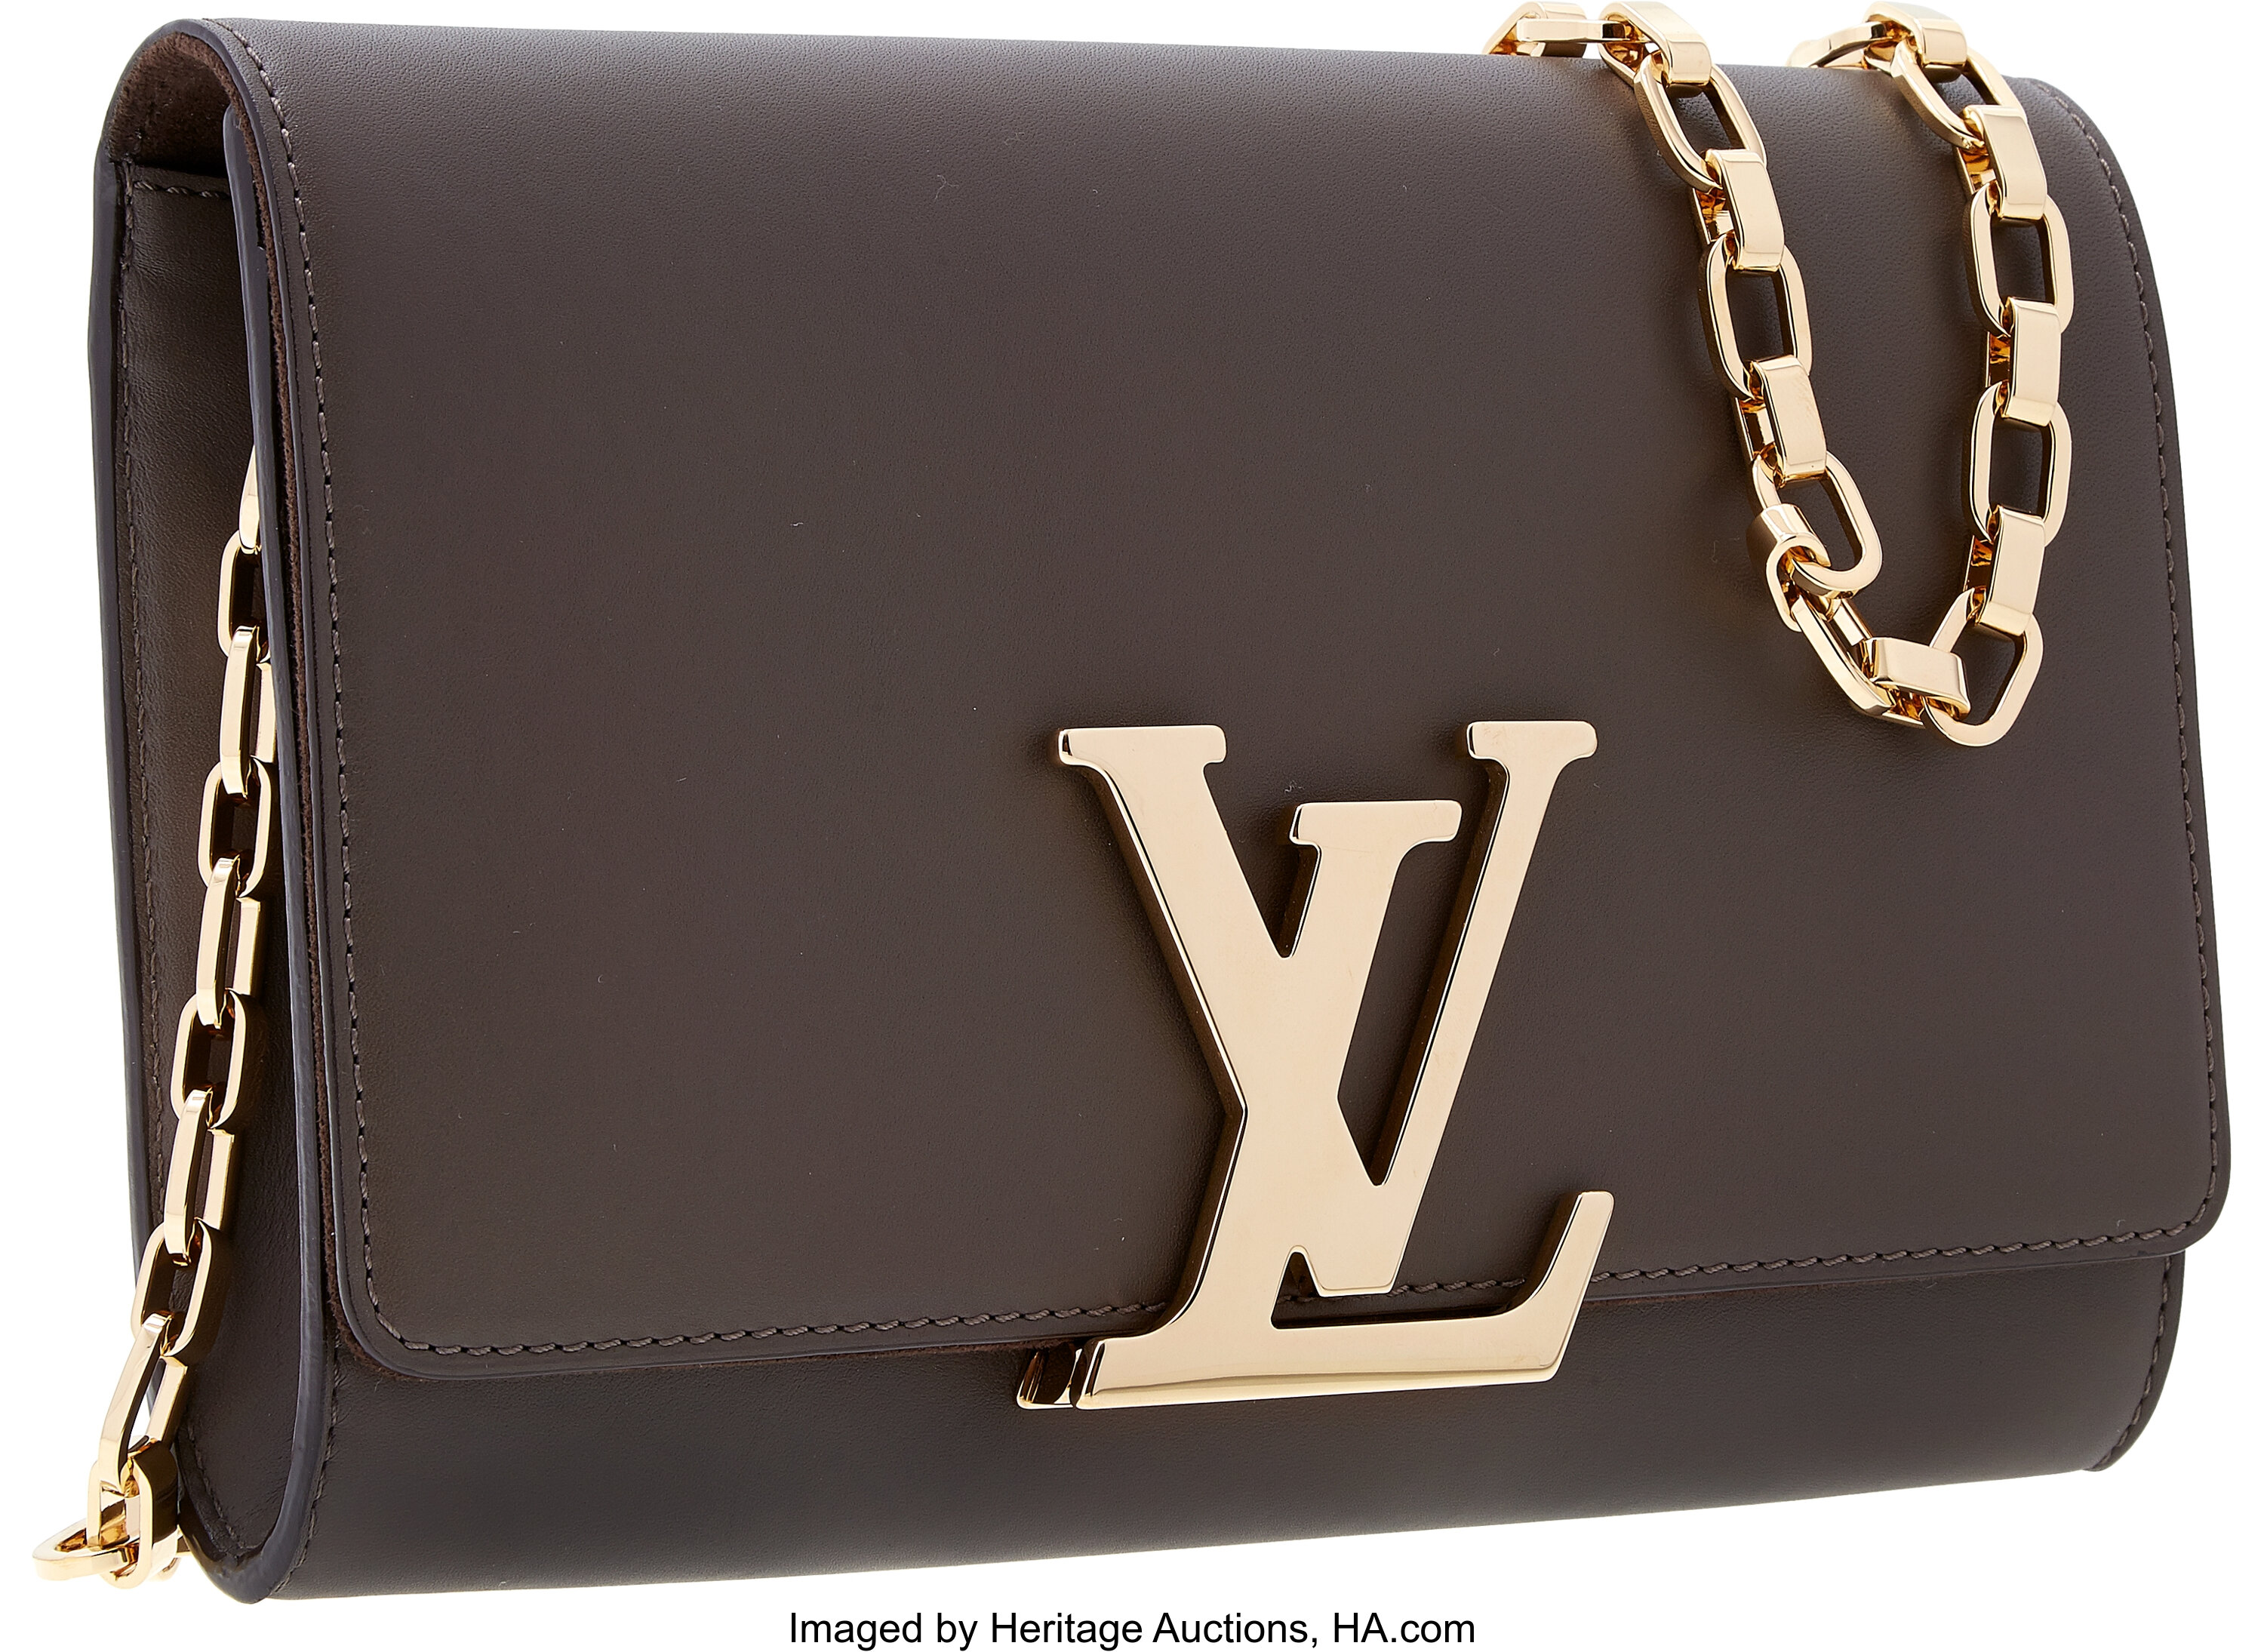 Sold at Auction: A handbag marked Louis Vuitton with chain/belted